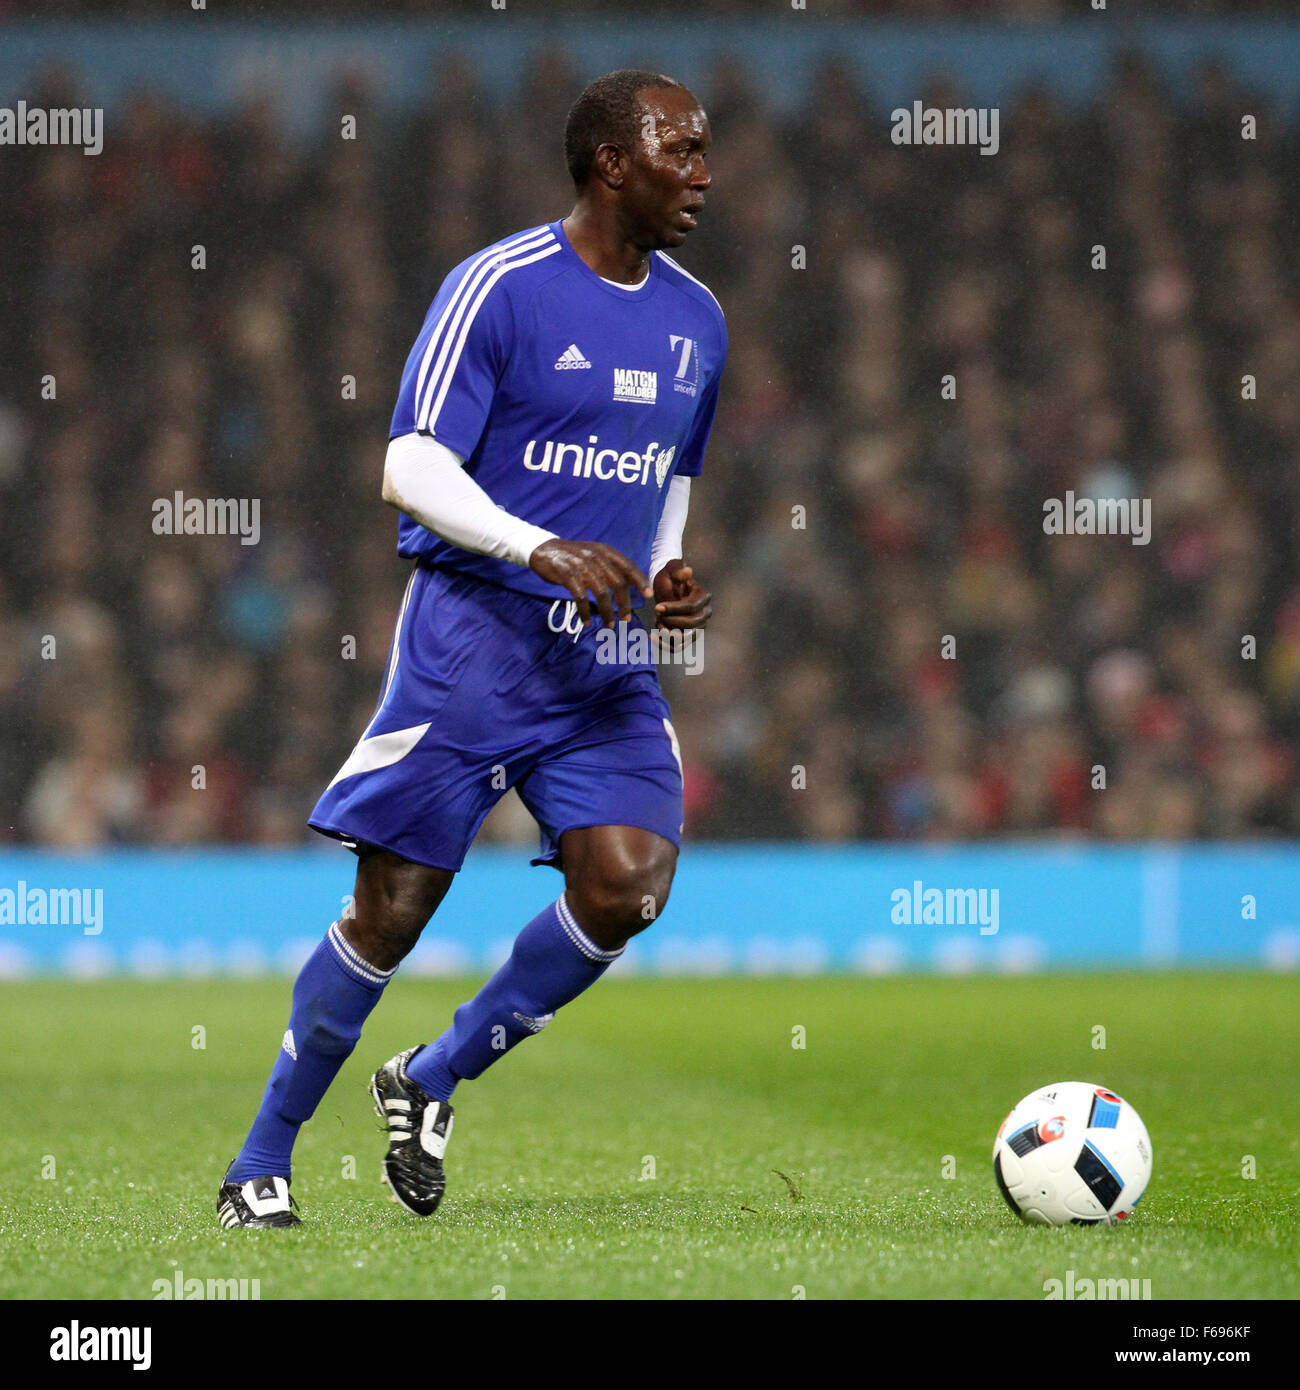 Old Trafford, Manchester, UK. 14th Nov, 2015. Unicef Match for Children. GB and NI XI versus Rest of the World XI. Dwight Yorke (Rest of World) in action © Action Plus Sports/Alamy Live News Stock Photo